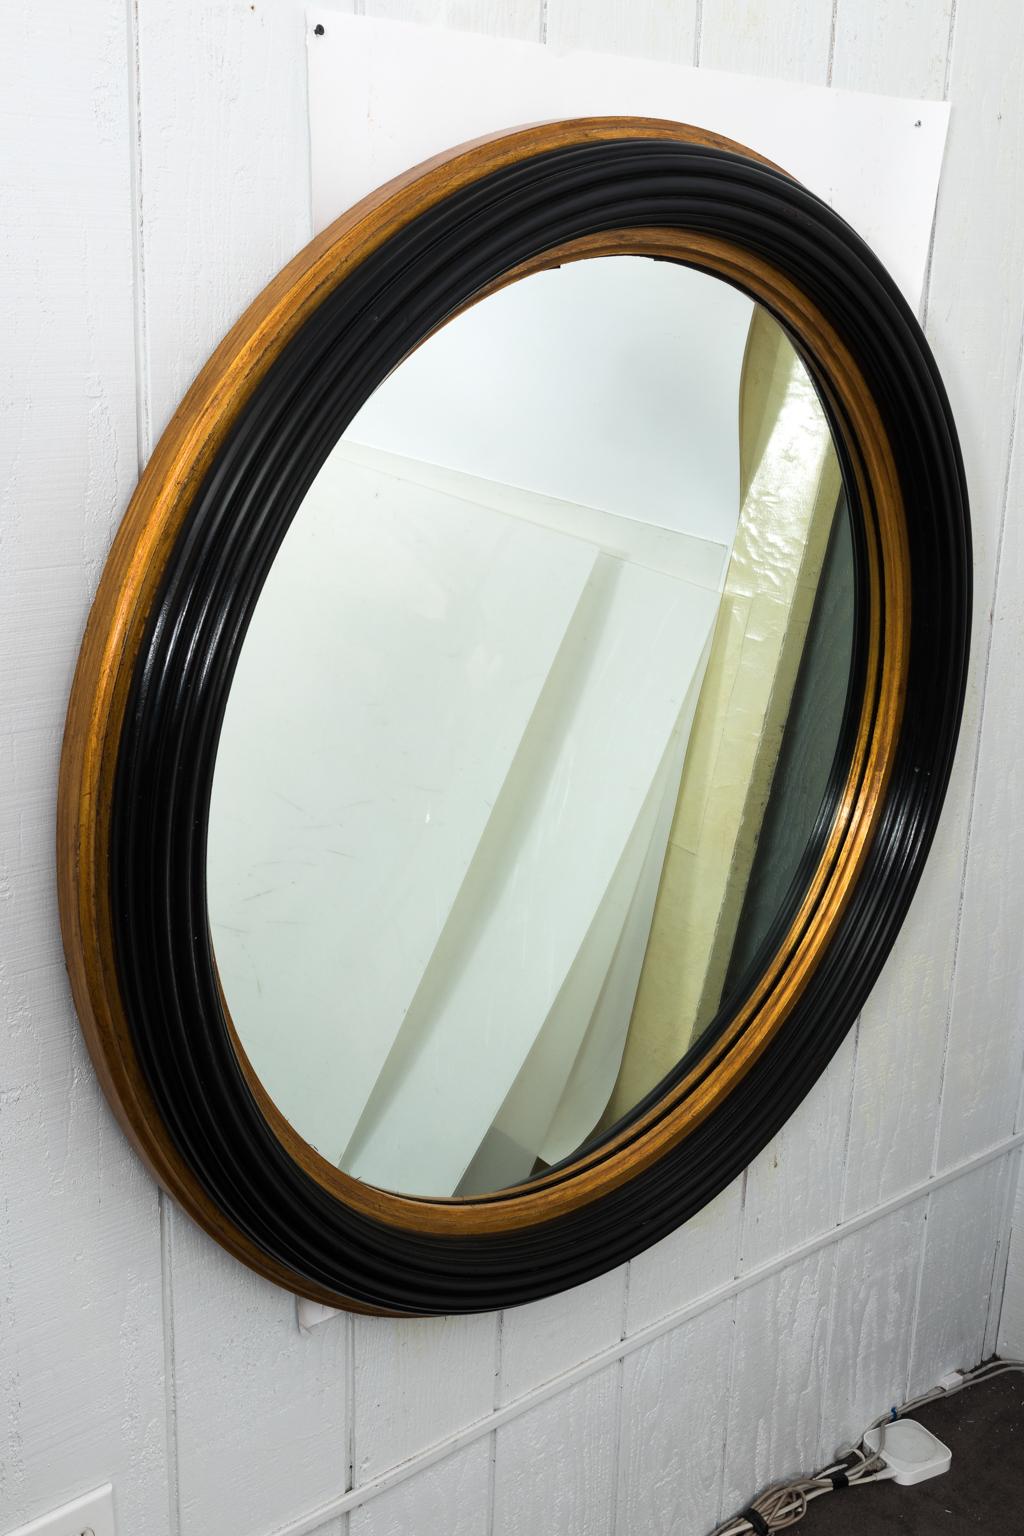 Custom designer round ridged mahogany mirror in black with gold gilt accent trim. Please note of minor chips to the frame due to wear with use.
 